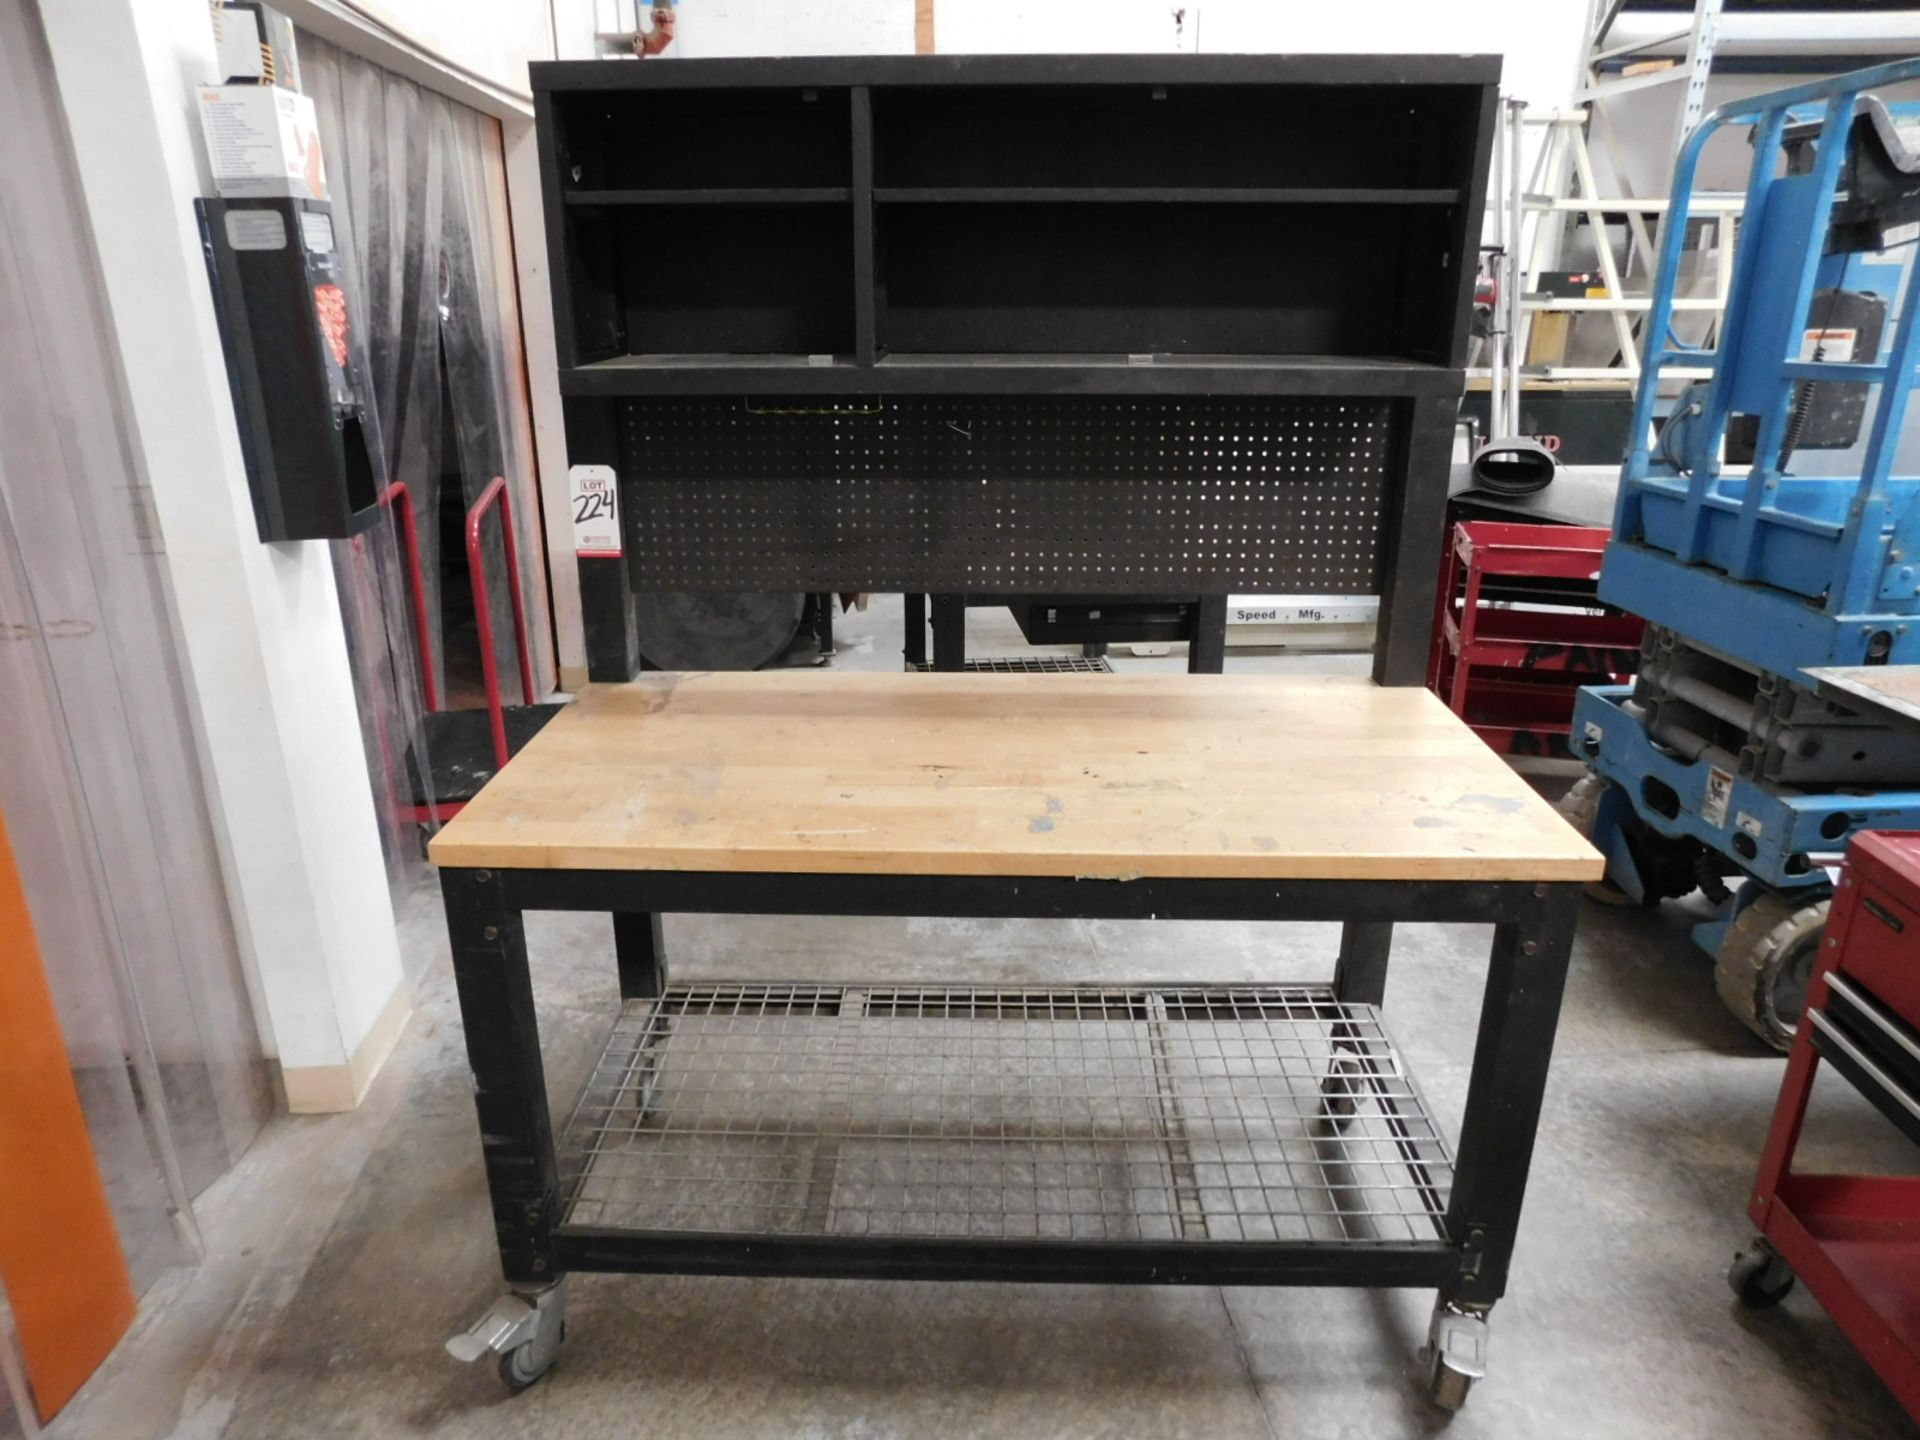 5' X 27" BUTCHER BLOCK TOPPED STEEL CART ON CASTERS, MESH SHELF, PEGBOARD HALF-BACK, CONTENTS NOT